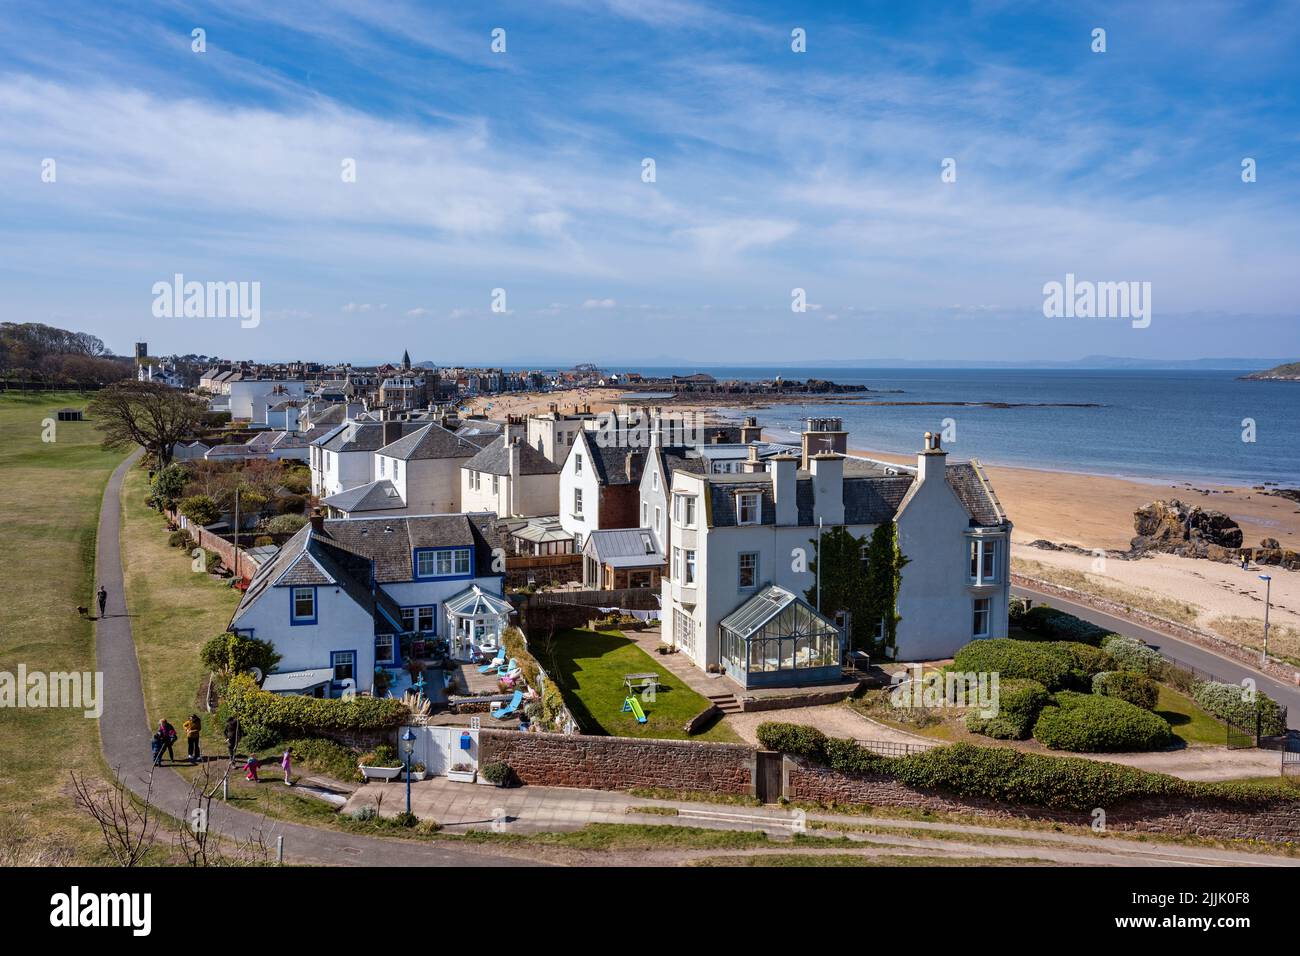 Houses on Marine Parade on seafront of coastal town of North Berwick in East Lothian, Scotland, UK Stock Photo